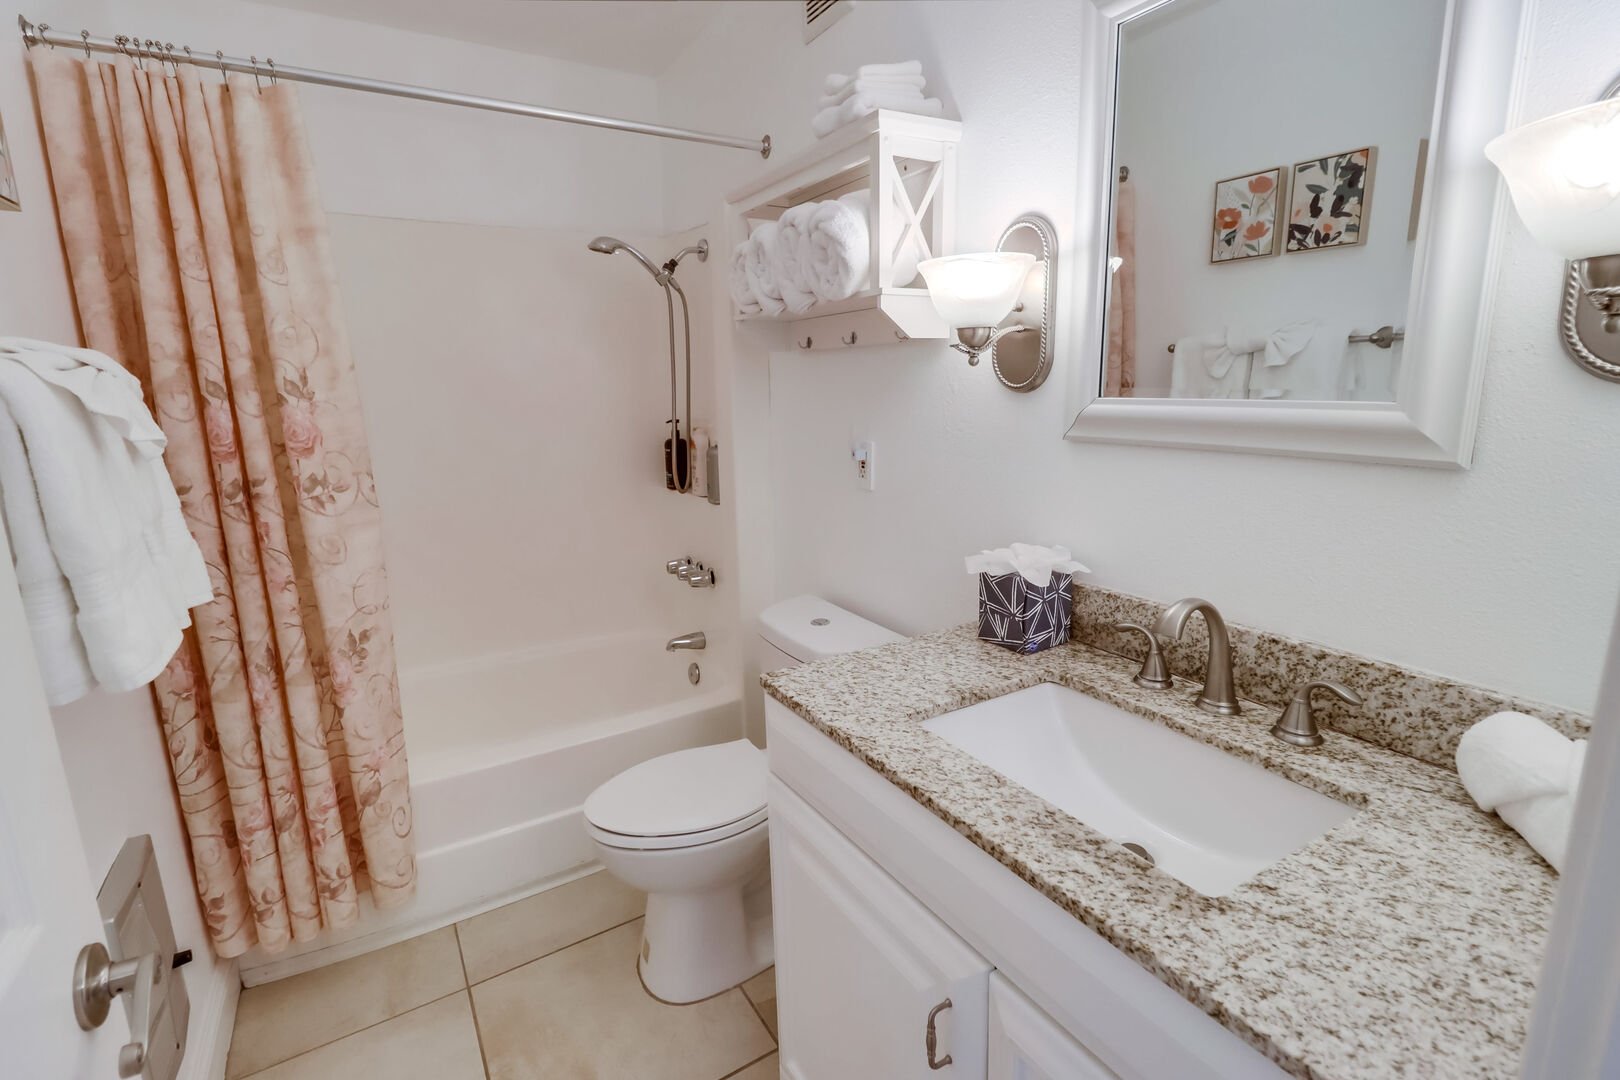 Full shared bathroom with shower-tub combo, hand-held shower head, large vanity with storage, brighting lighting and wall heater